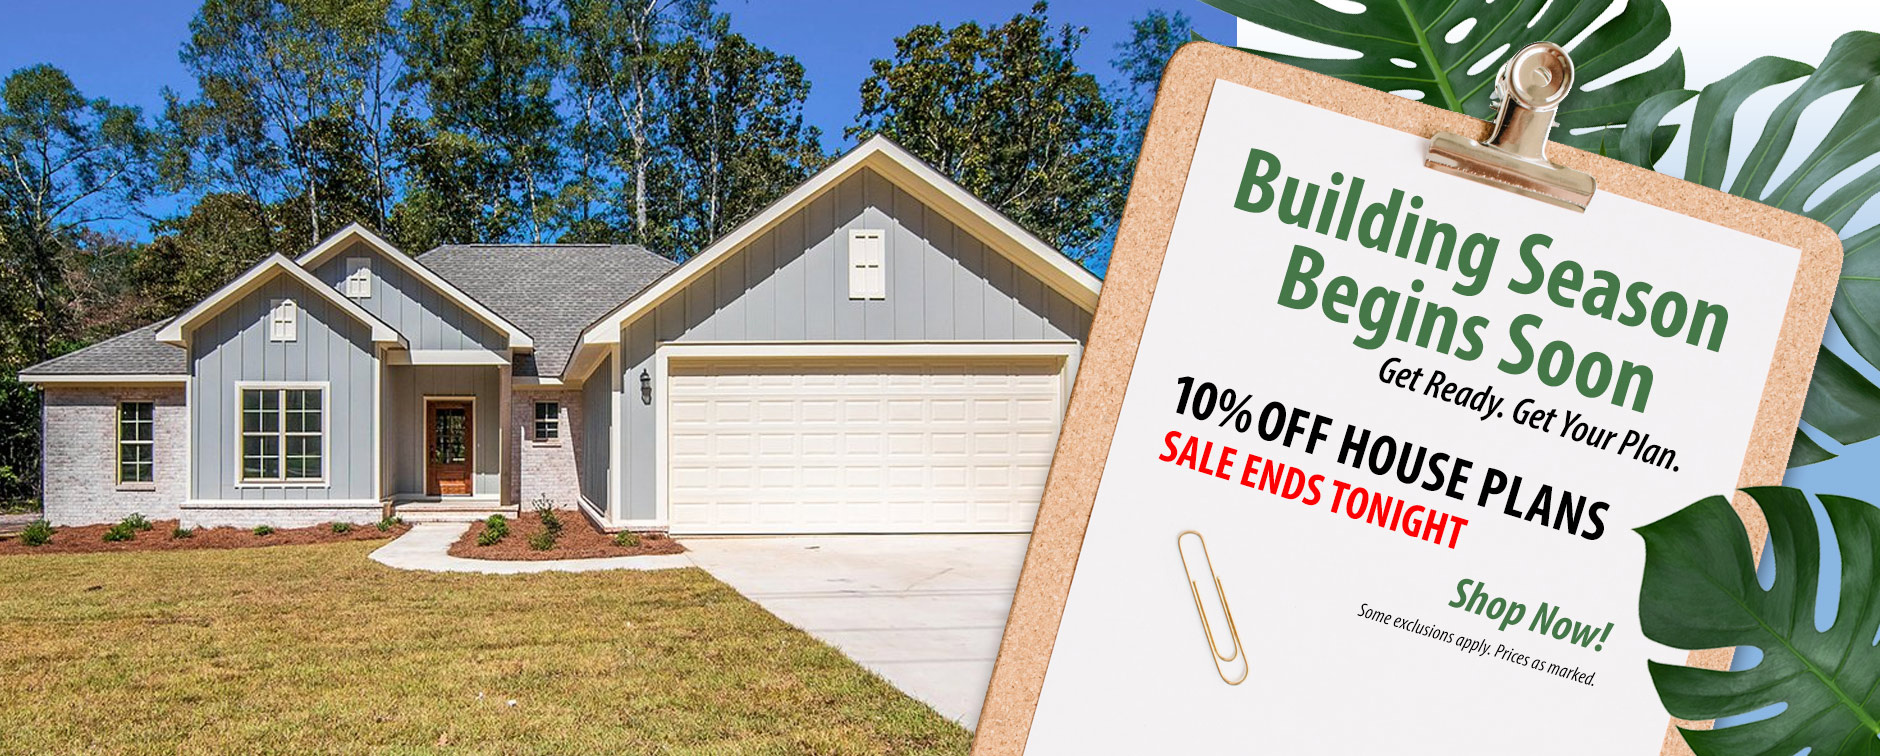 Building Season Starts Soon. Take 10% Off House Plans. No Code Needed. Sale Ends Tonight.